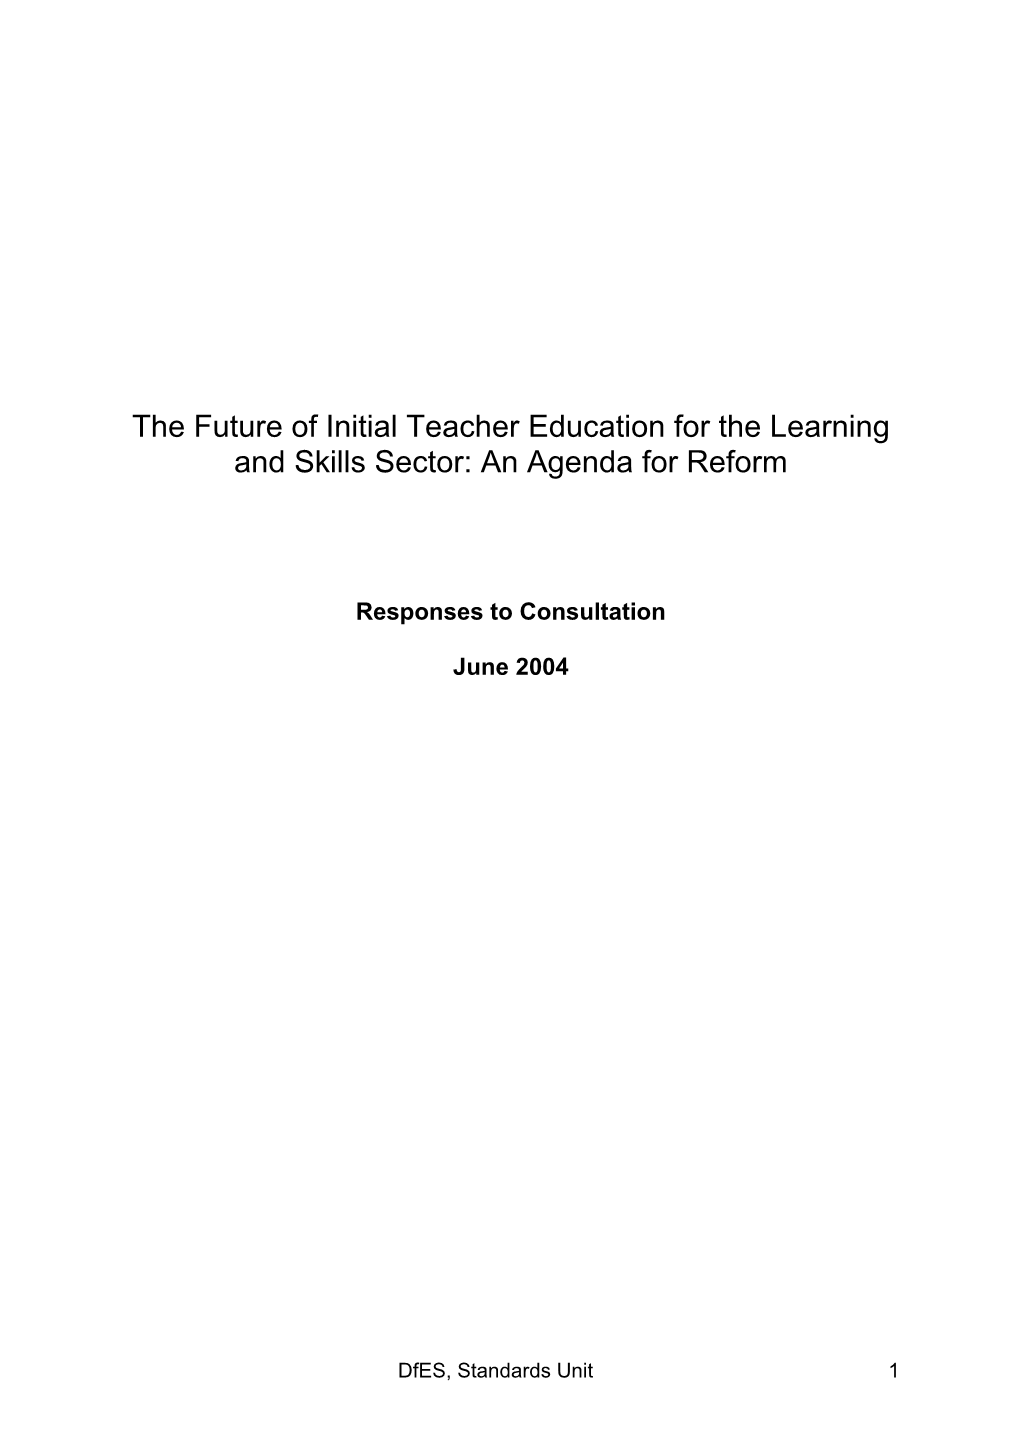 The Future of Initial Teacher Training for the Learning and Skills Sector